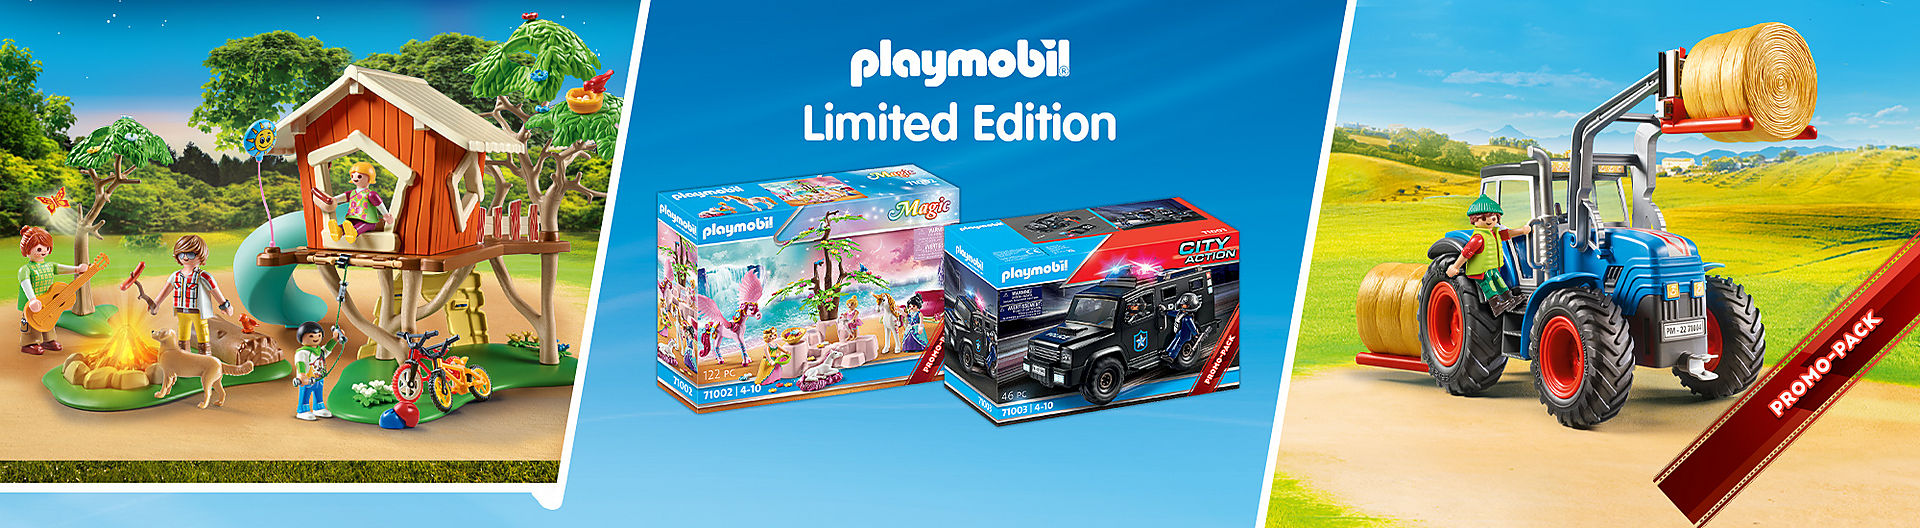 Discover PLAYMOBIL Promo Packs like 70899 Police Van with Lights and Sound and 70900 Zoo Veterinary Practice